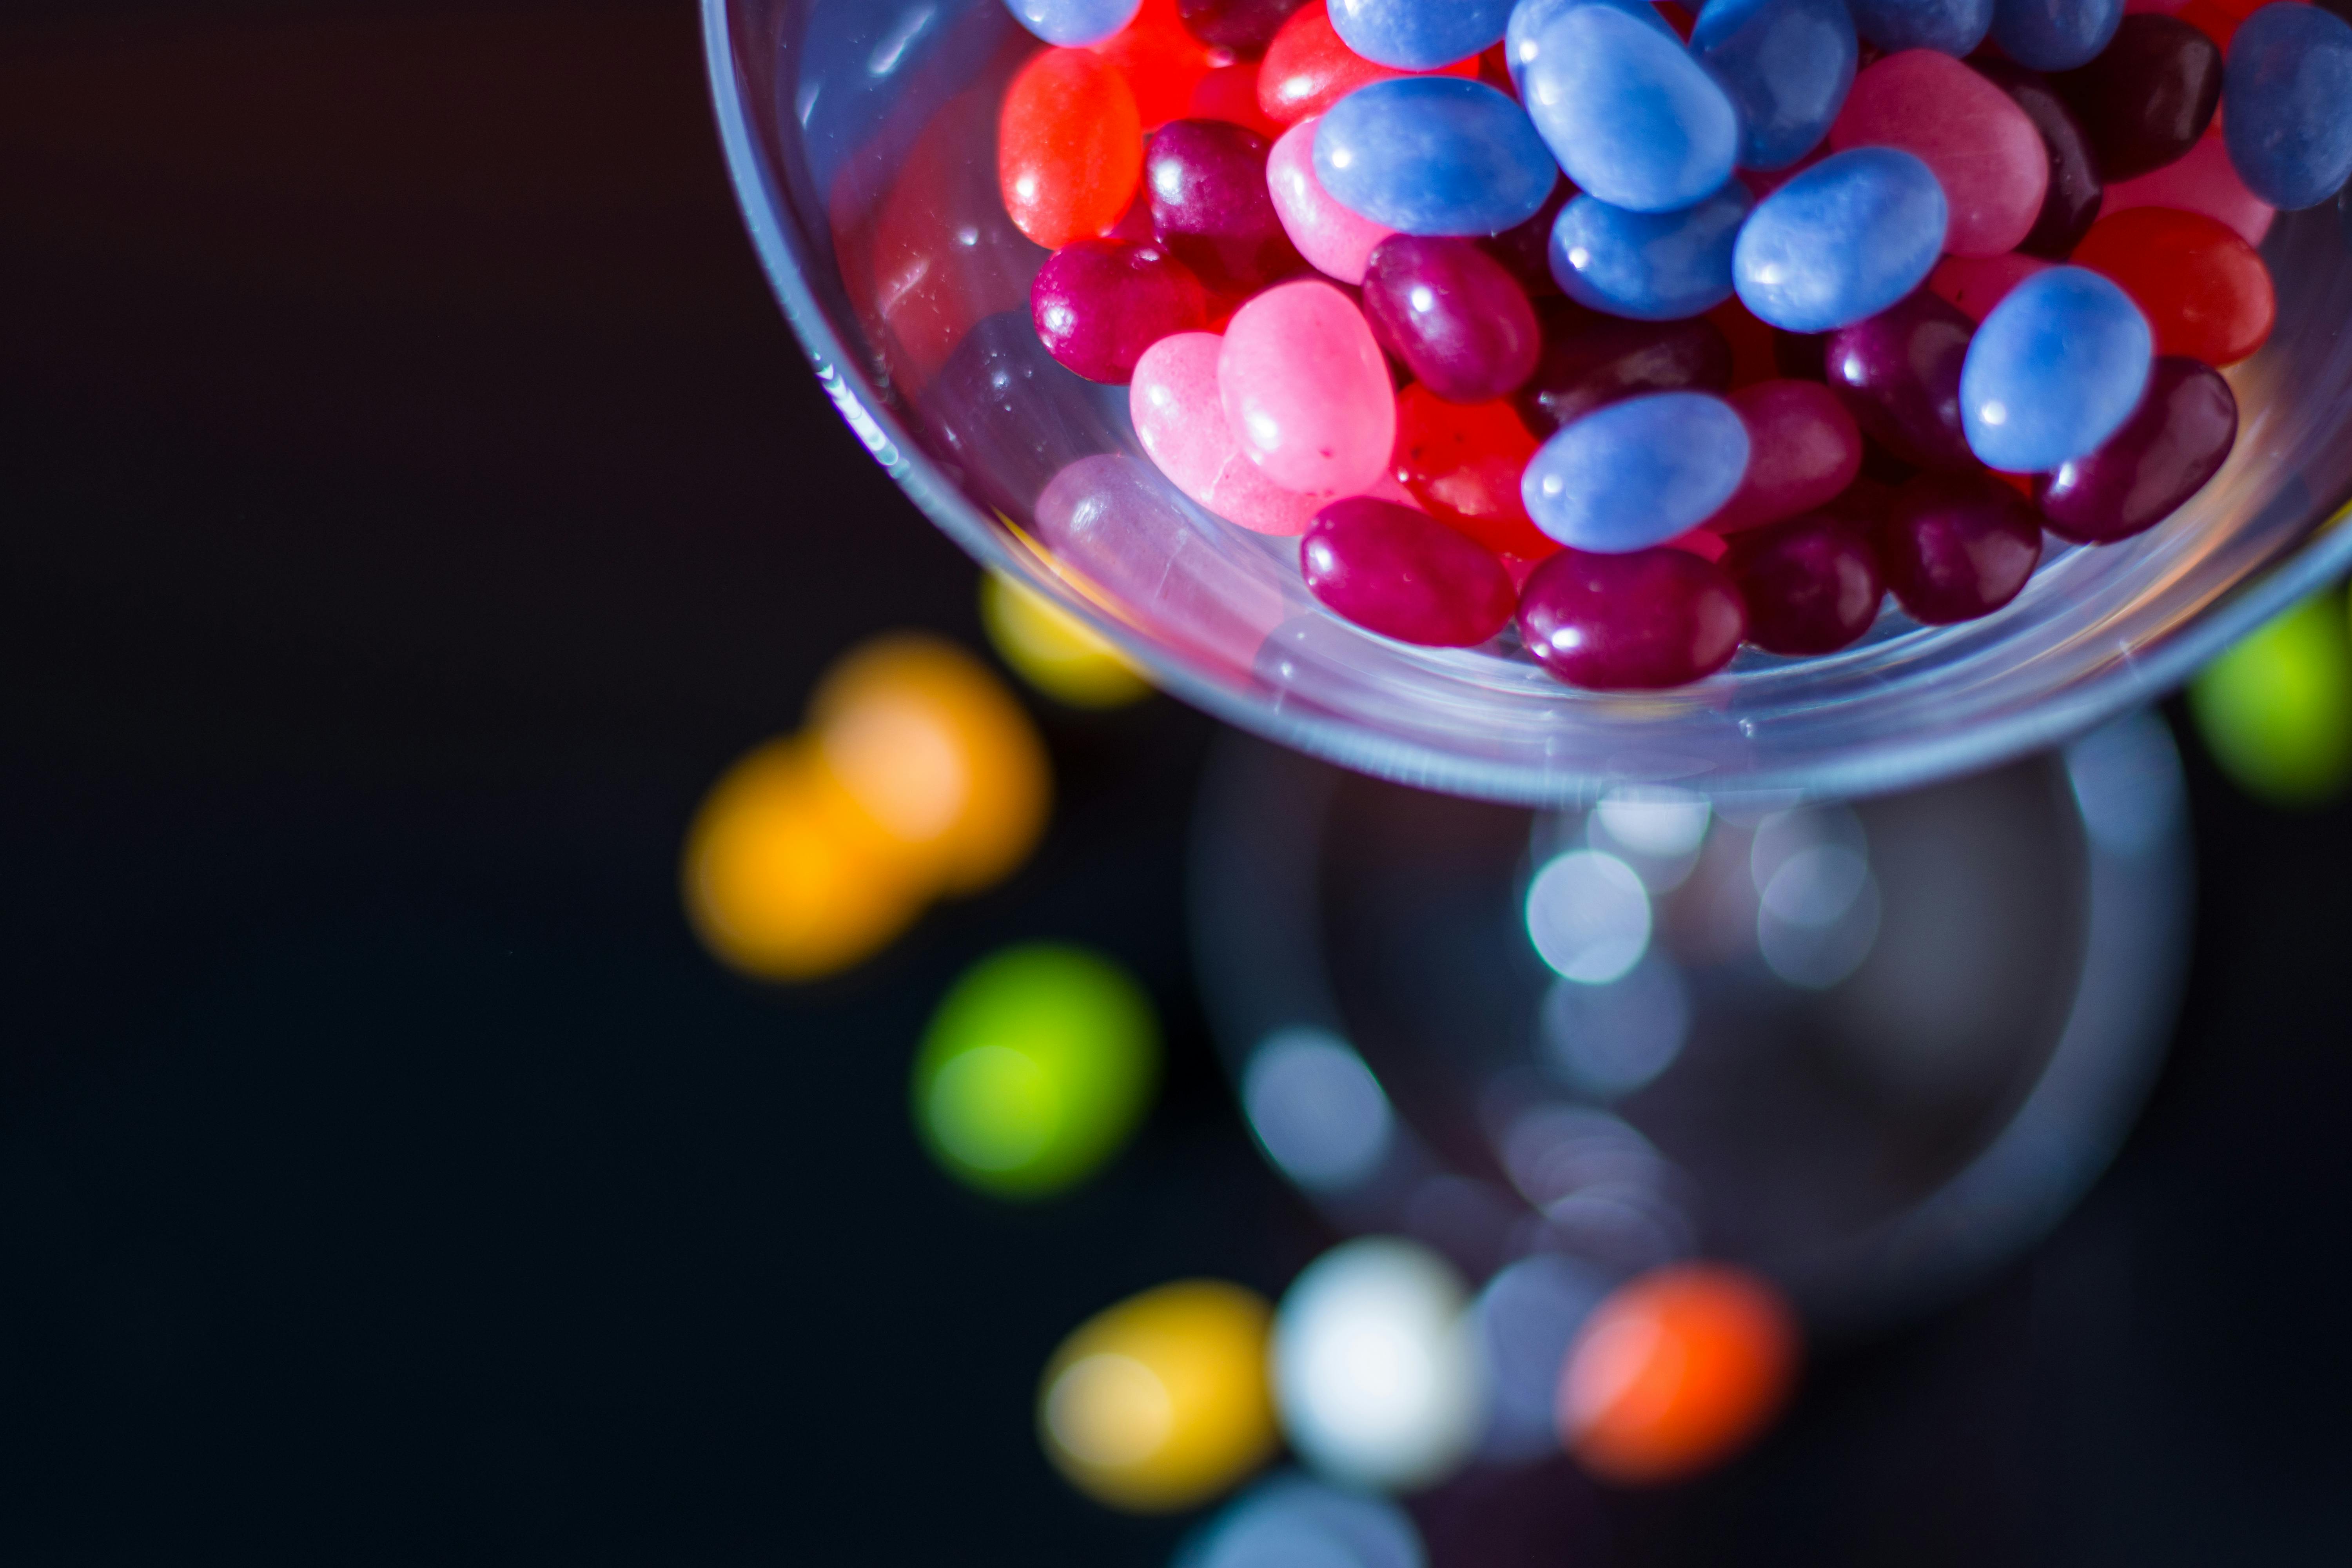 android jelly bean stock wallpaper